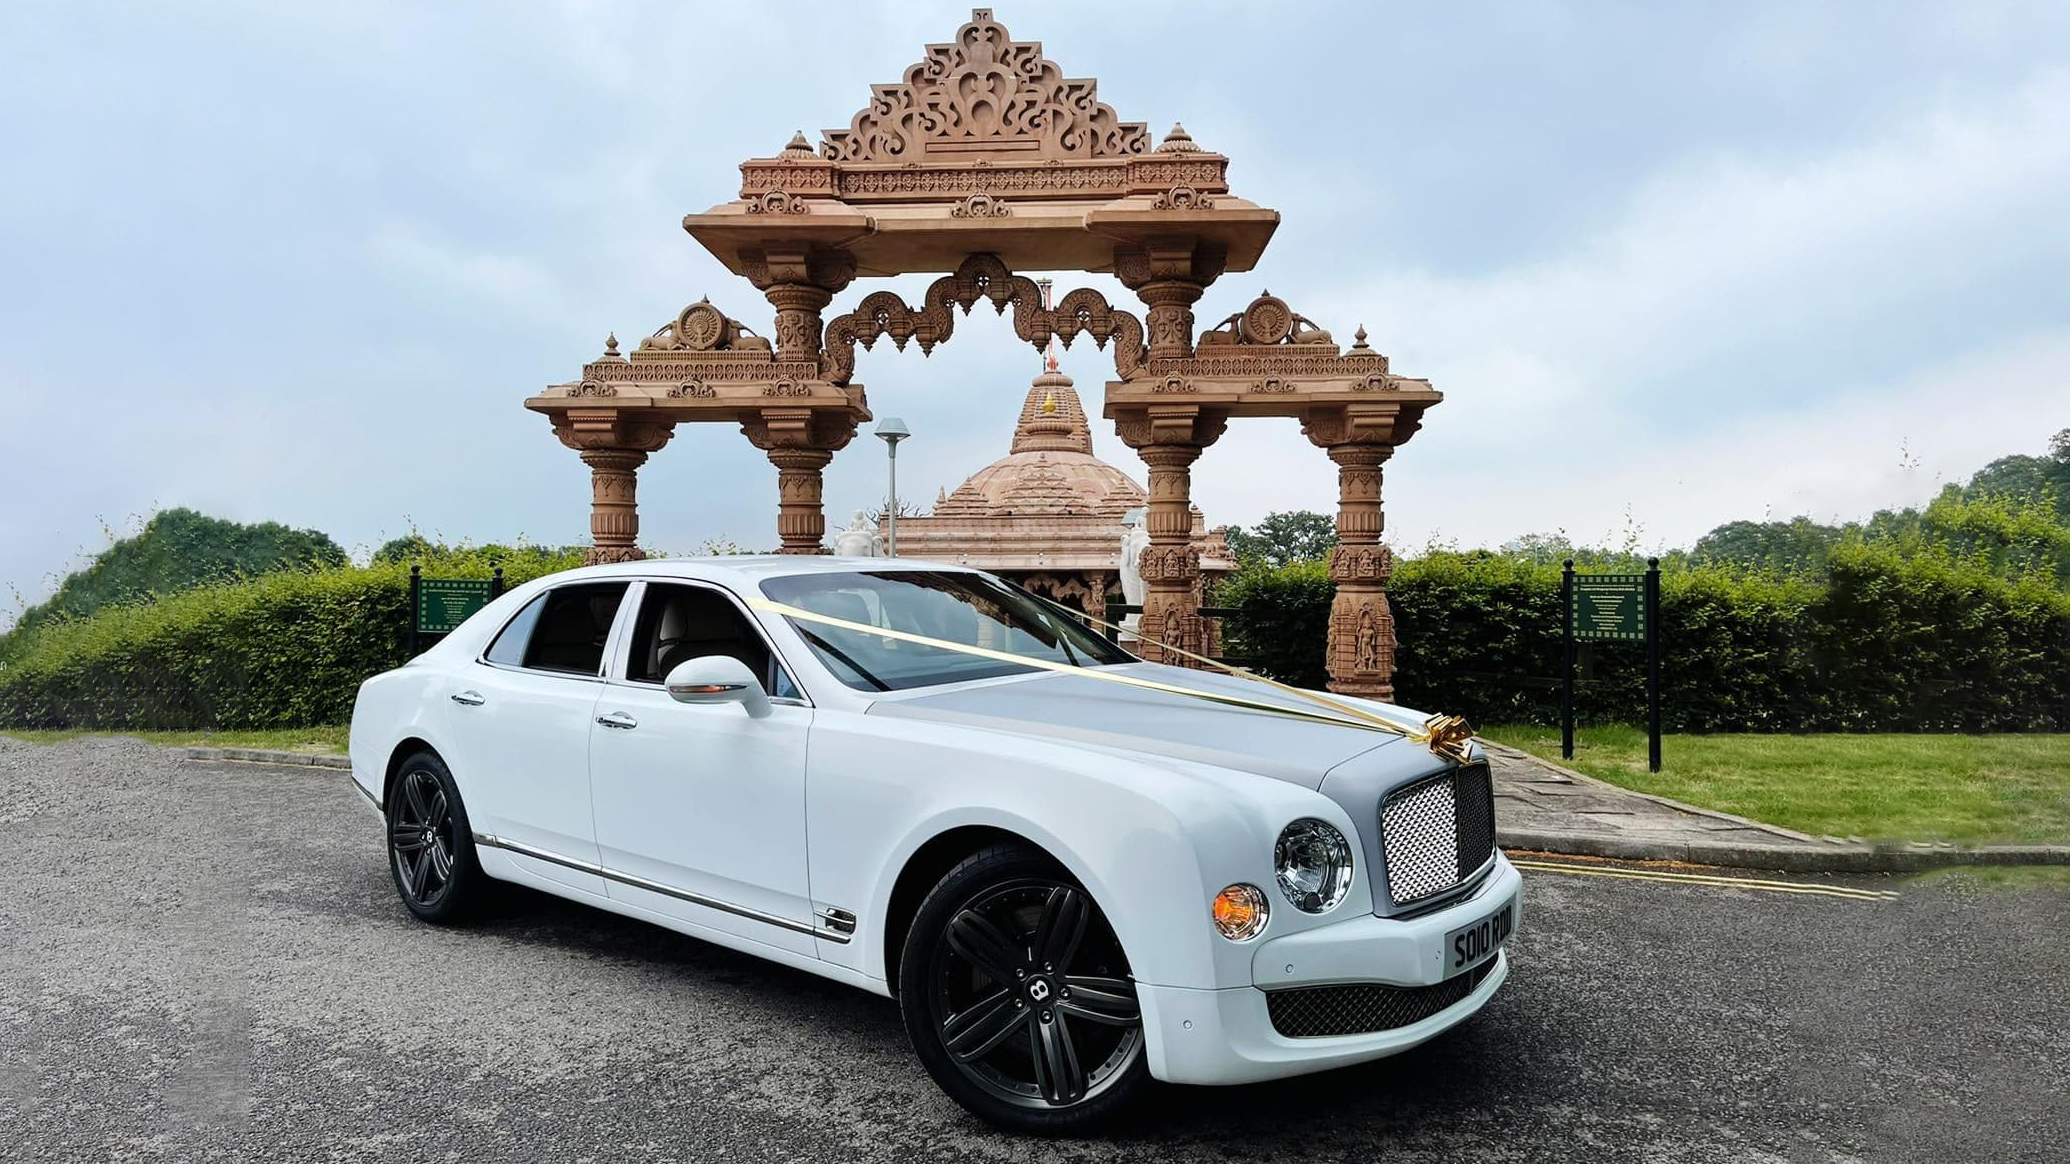 Modern Bentley Mulsanne with Black alloy wheels and Gold ribbons park in front of an Asian Temple in Dunstable.